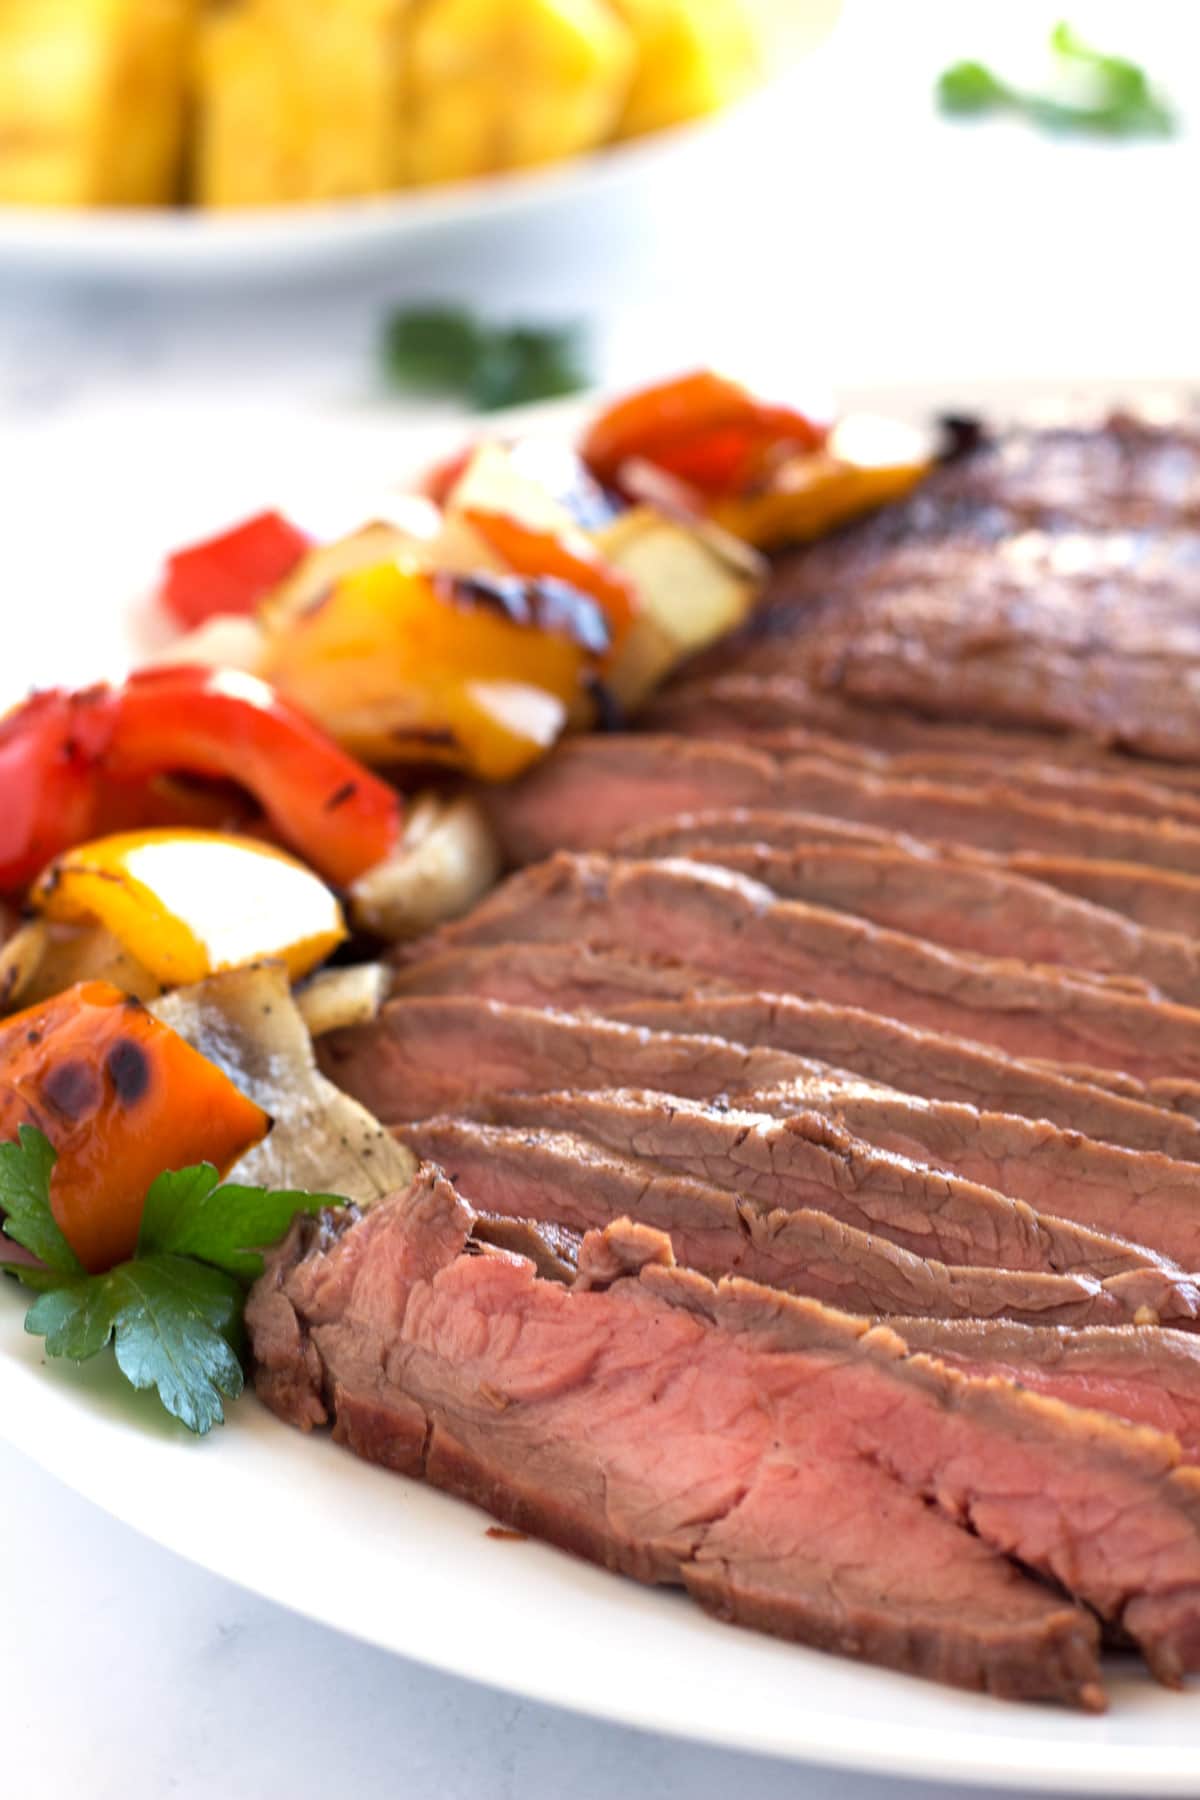 Flank steak with soy sauce marinade sliced on white platter with grilled veggies.